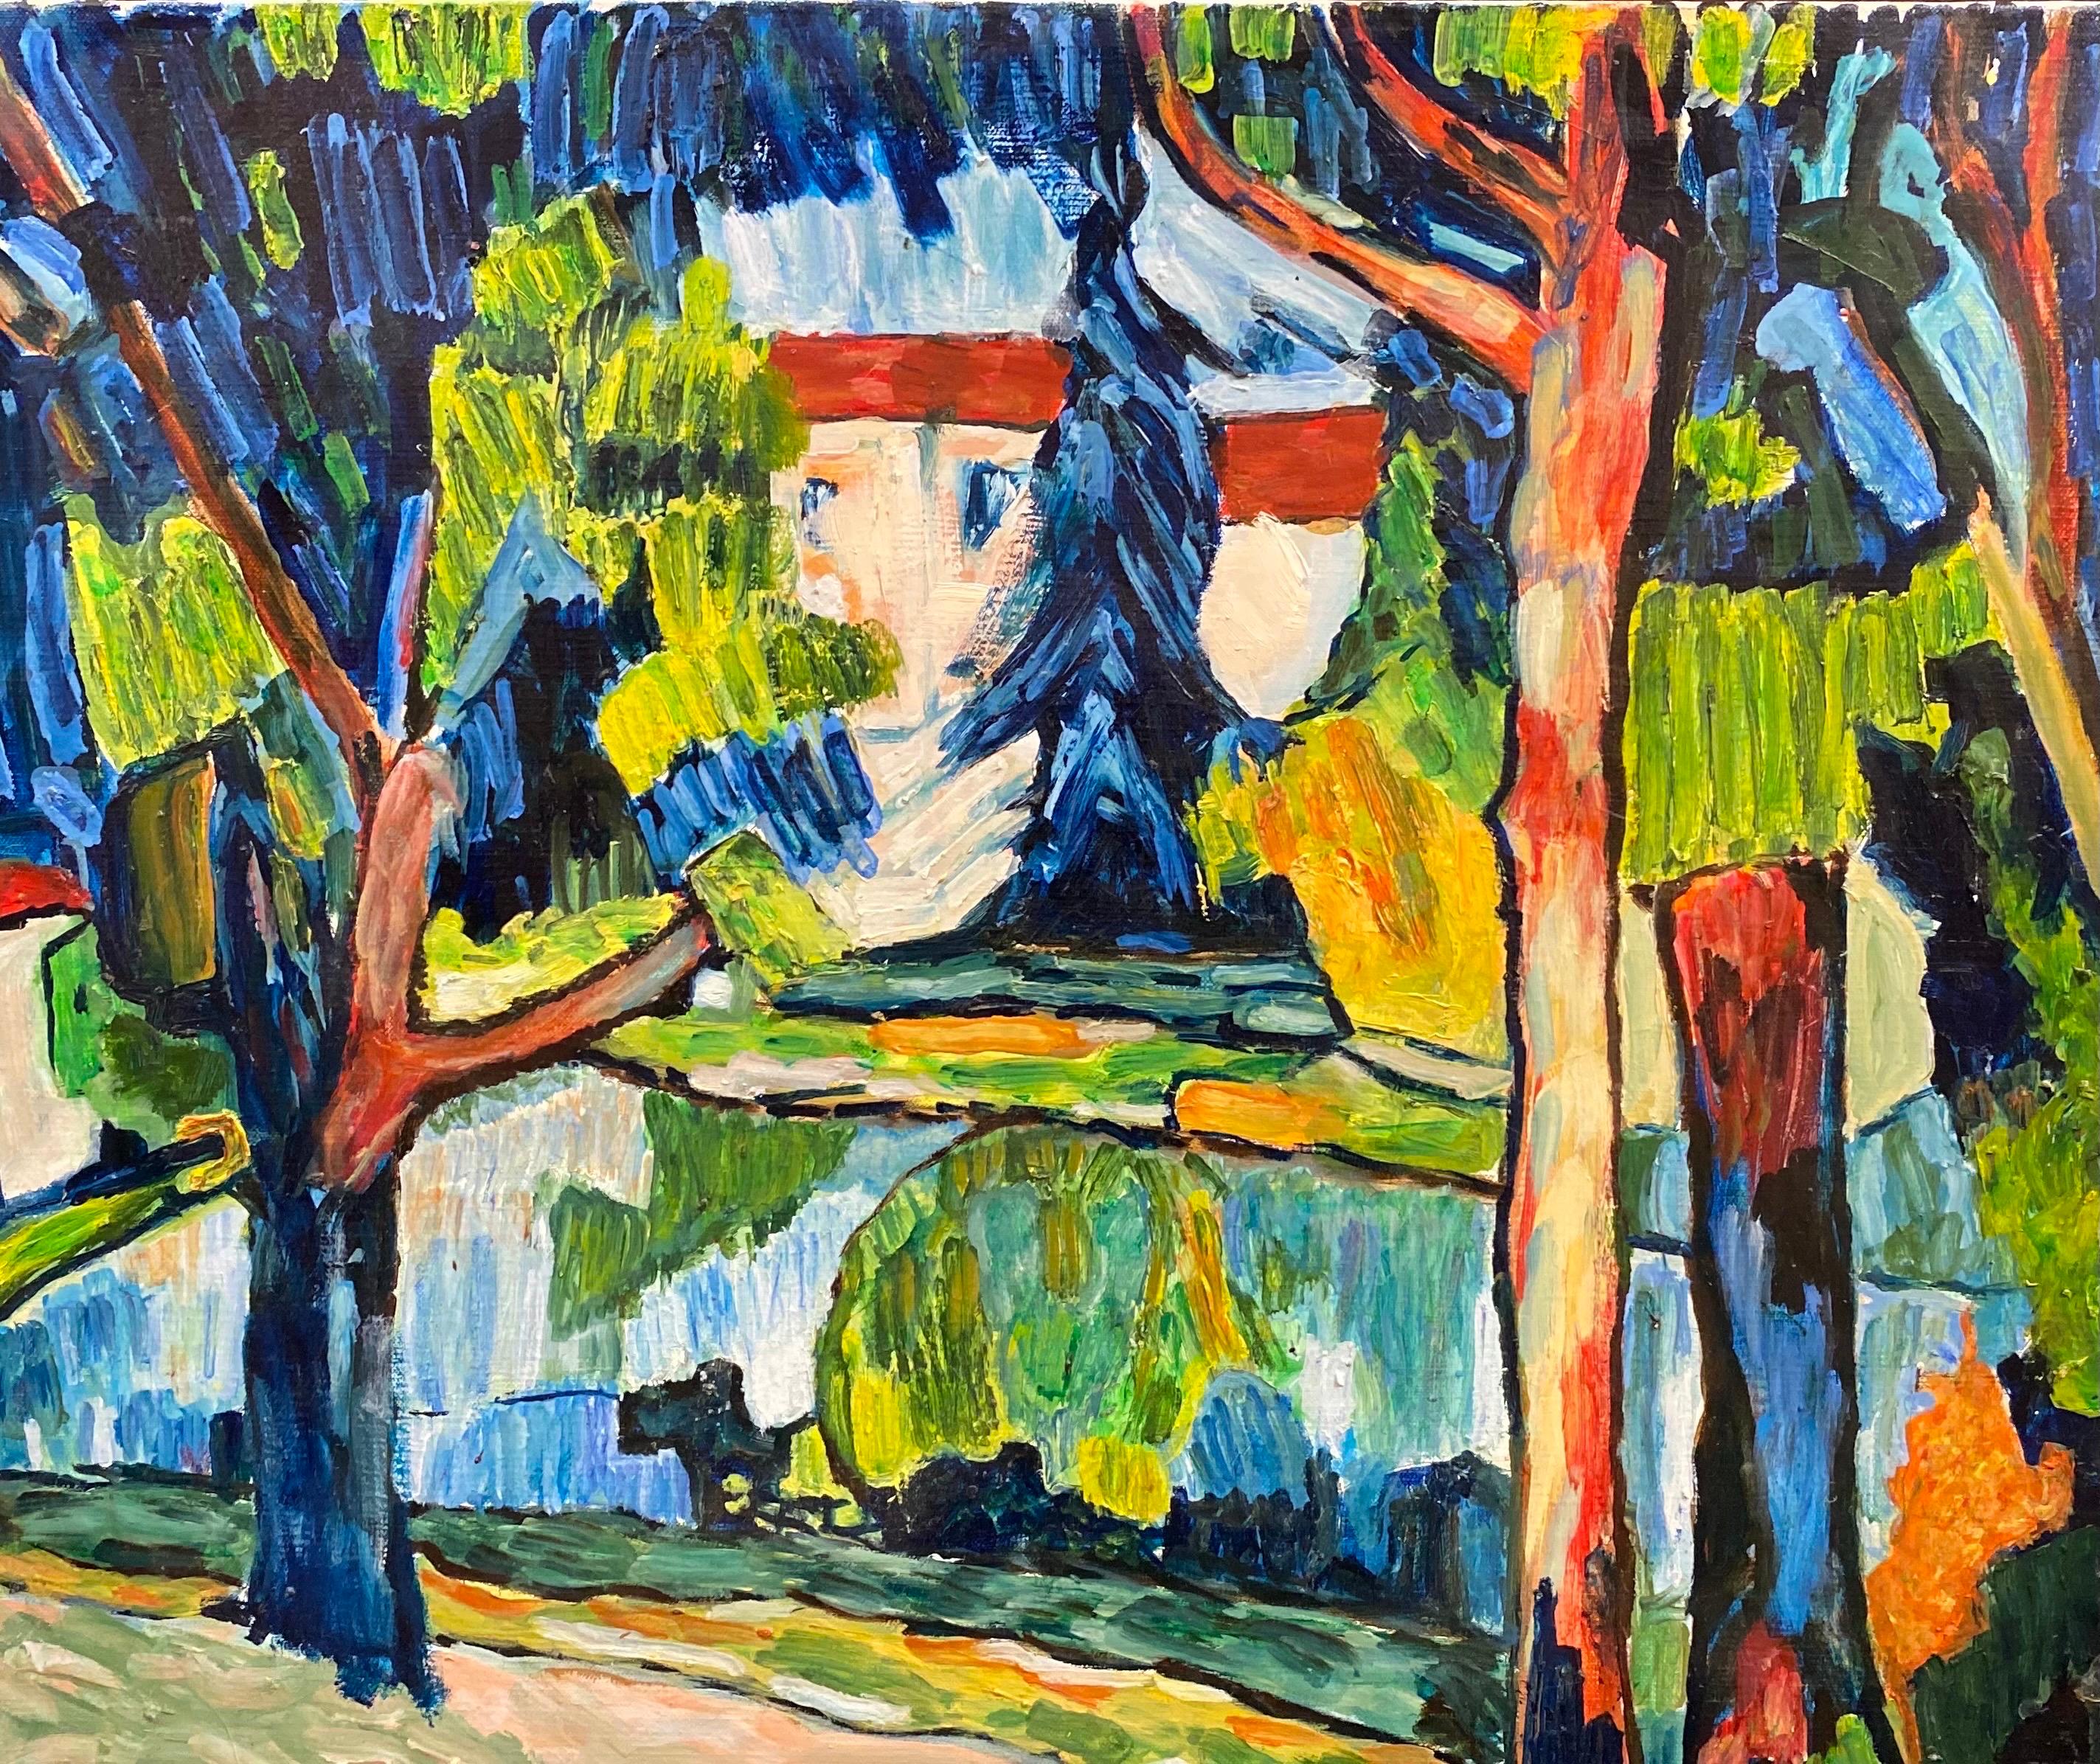 Colorful French Fauvist 20th Century Oil Painting on Canvas, after Vlaminck